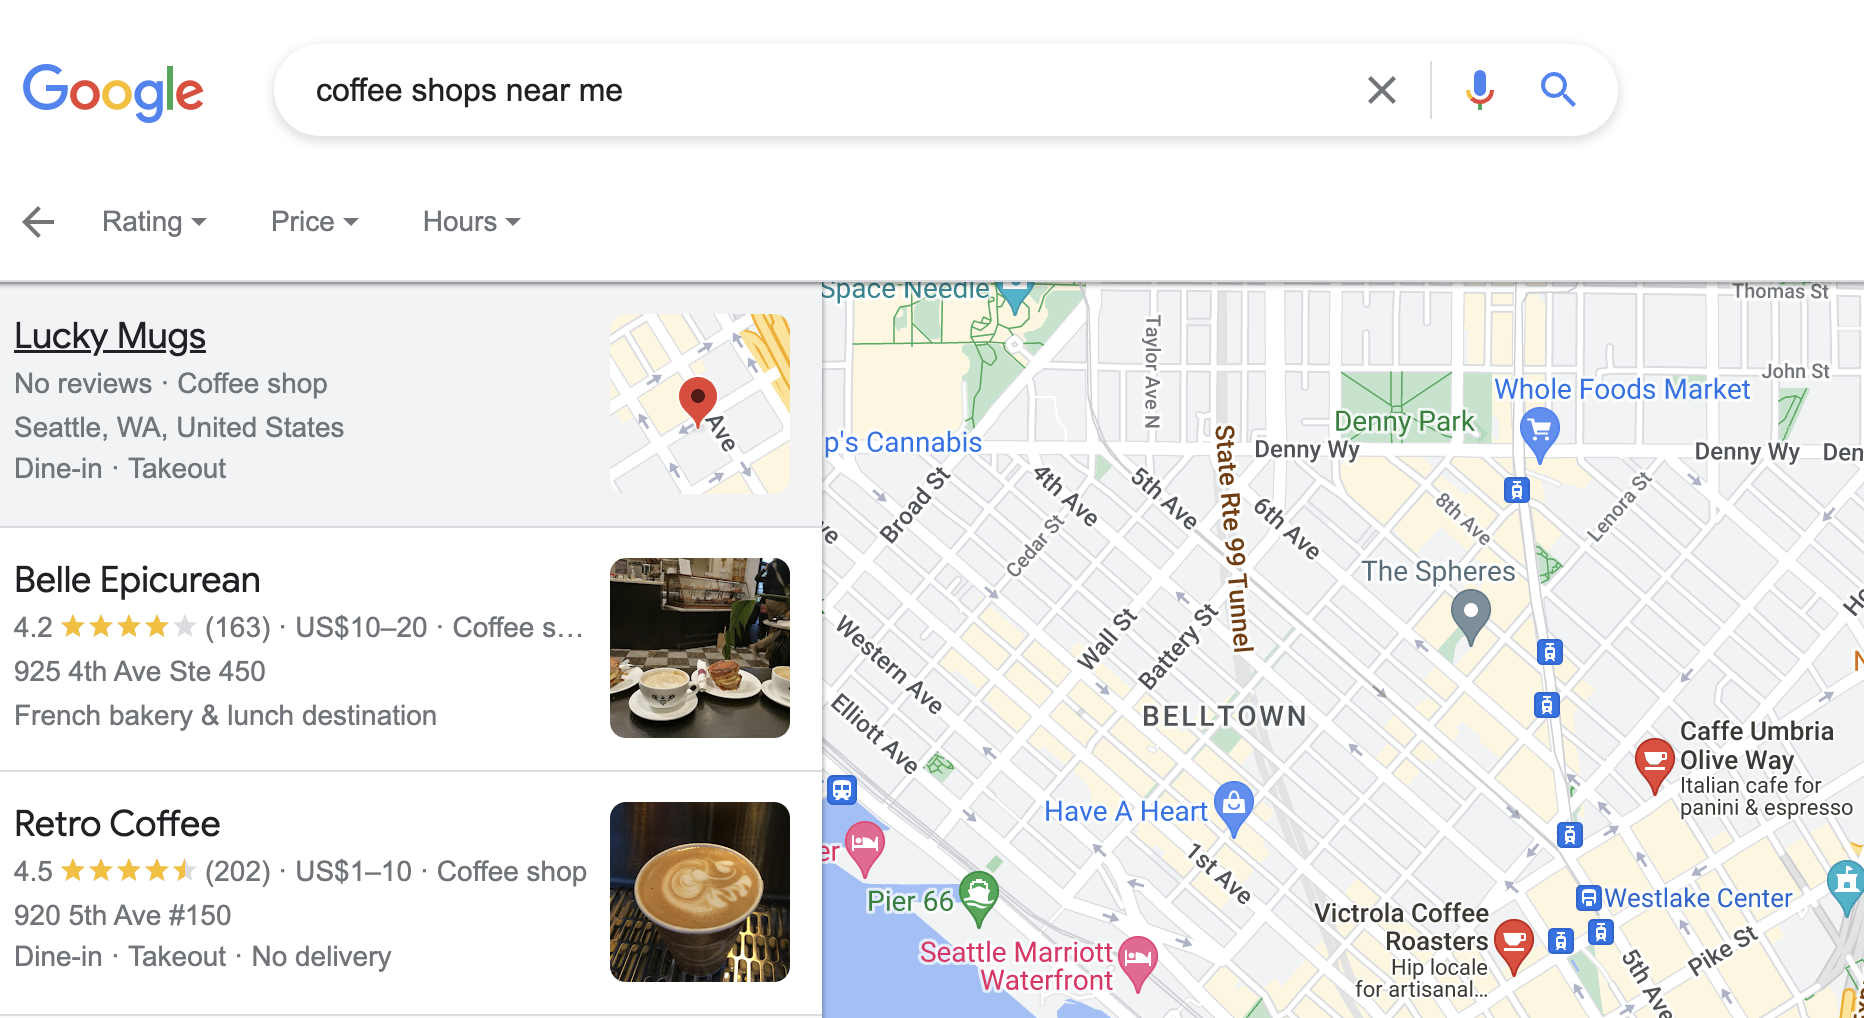 search for [coffee shops near me], Google